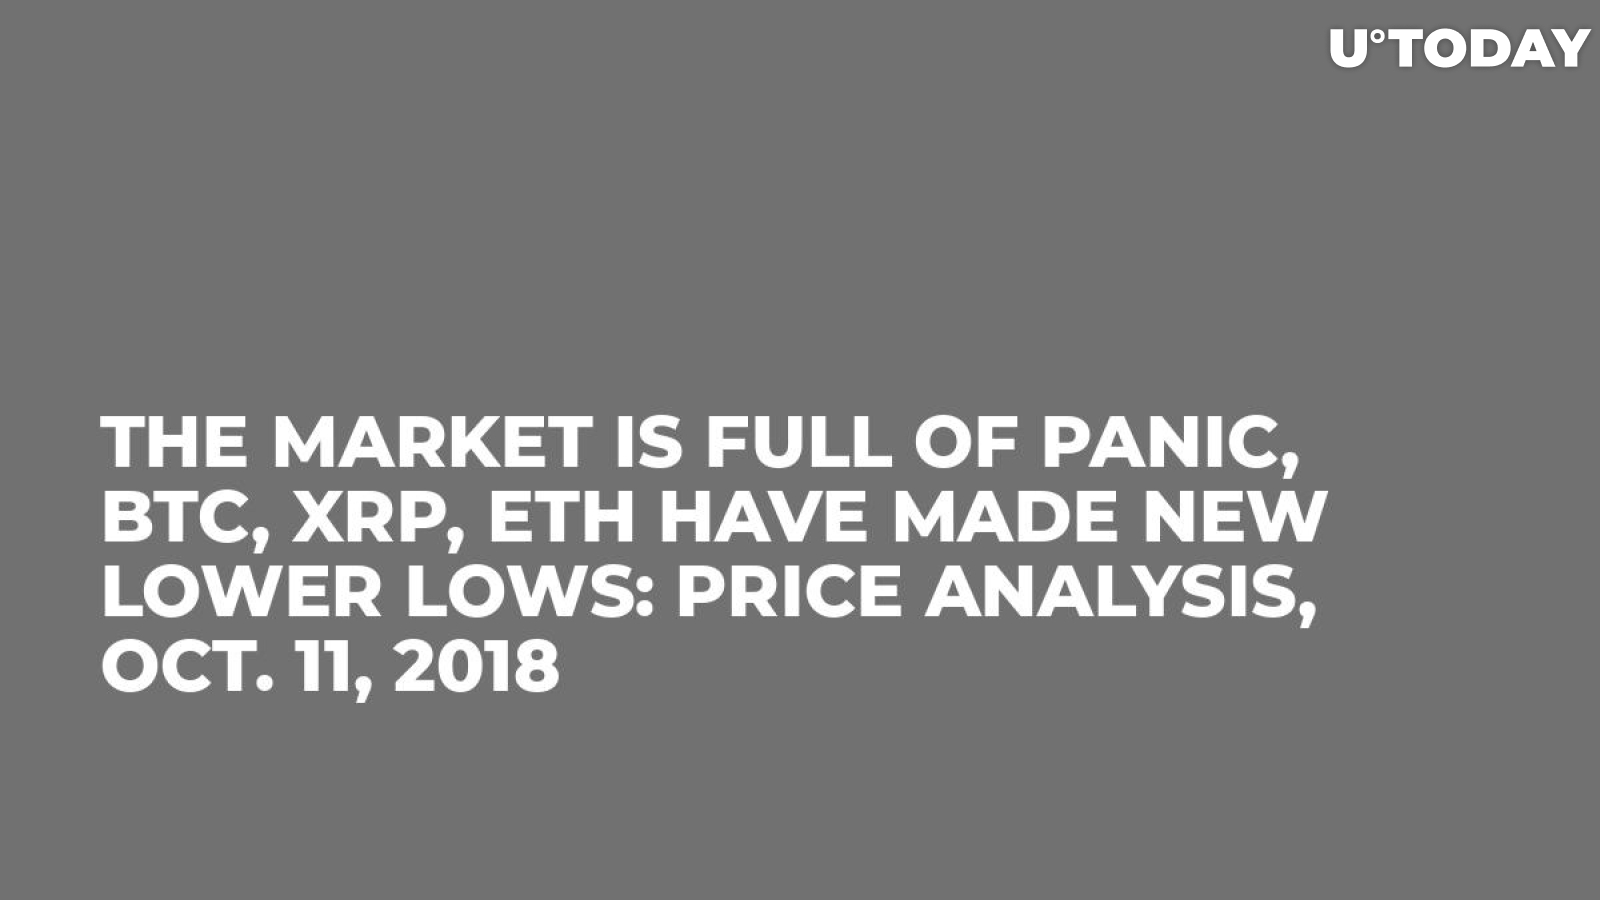 The Market Is Full Of Panic, BTC, XRP, ETH Have Made New Lower Lows: Price Analysis, Oct. 11, 2018